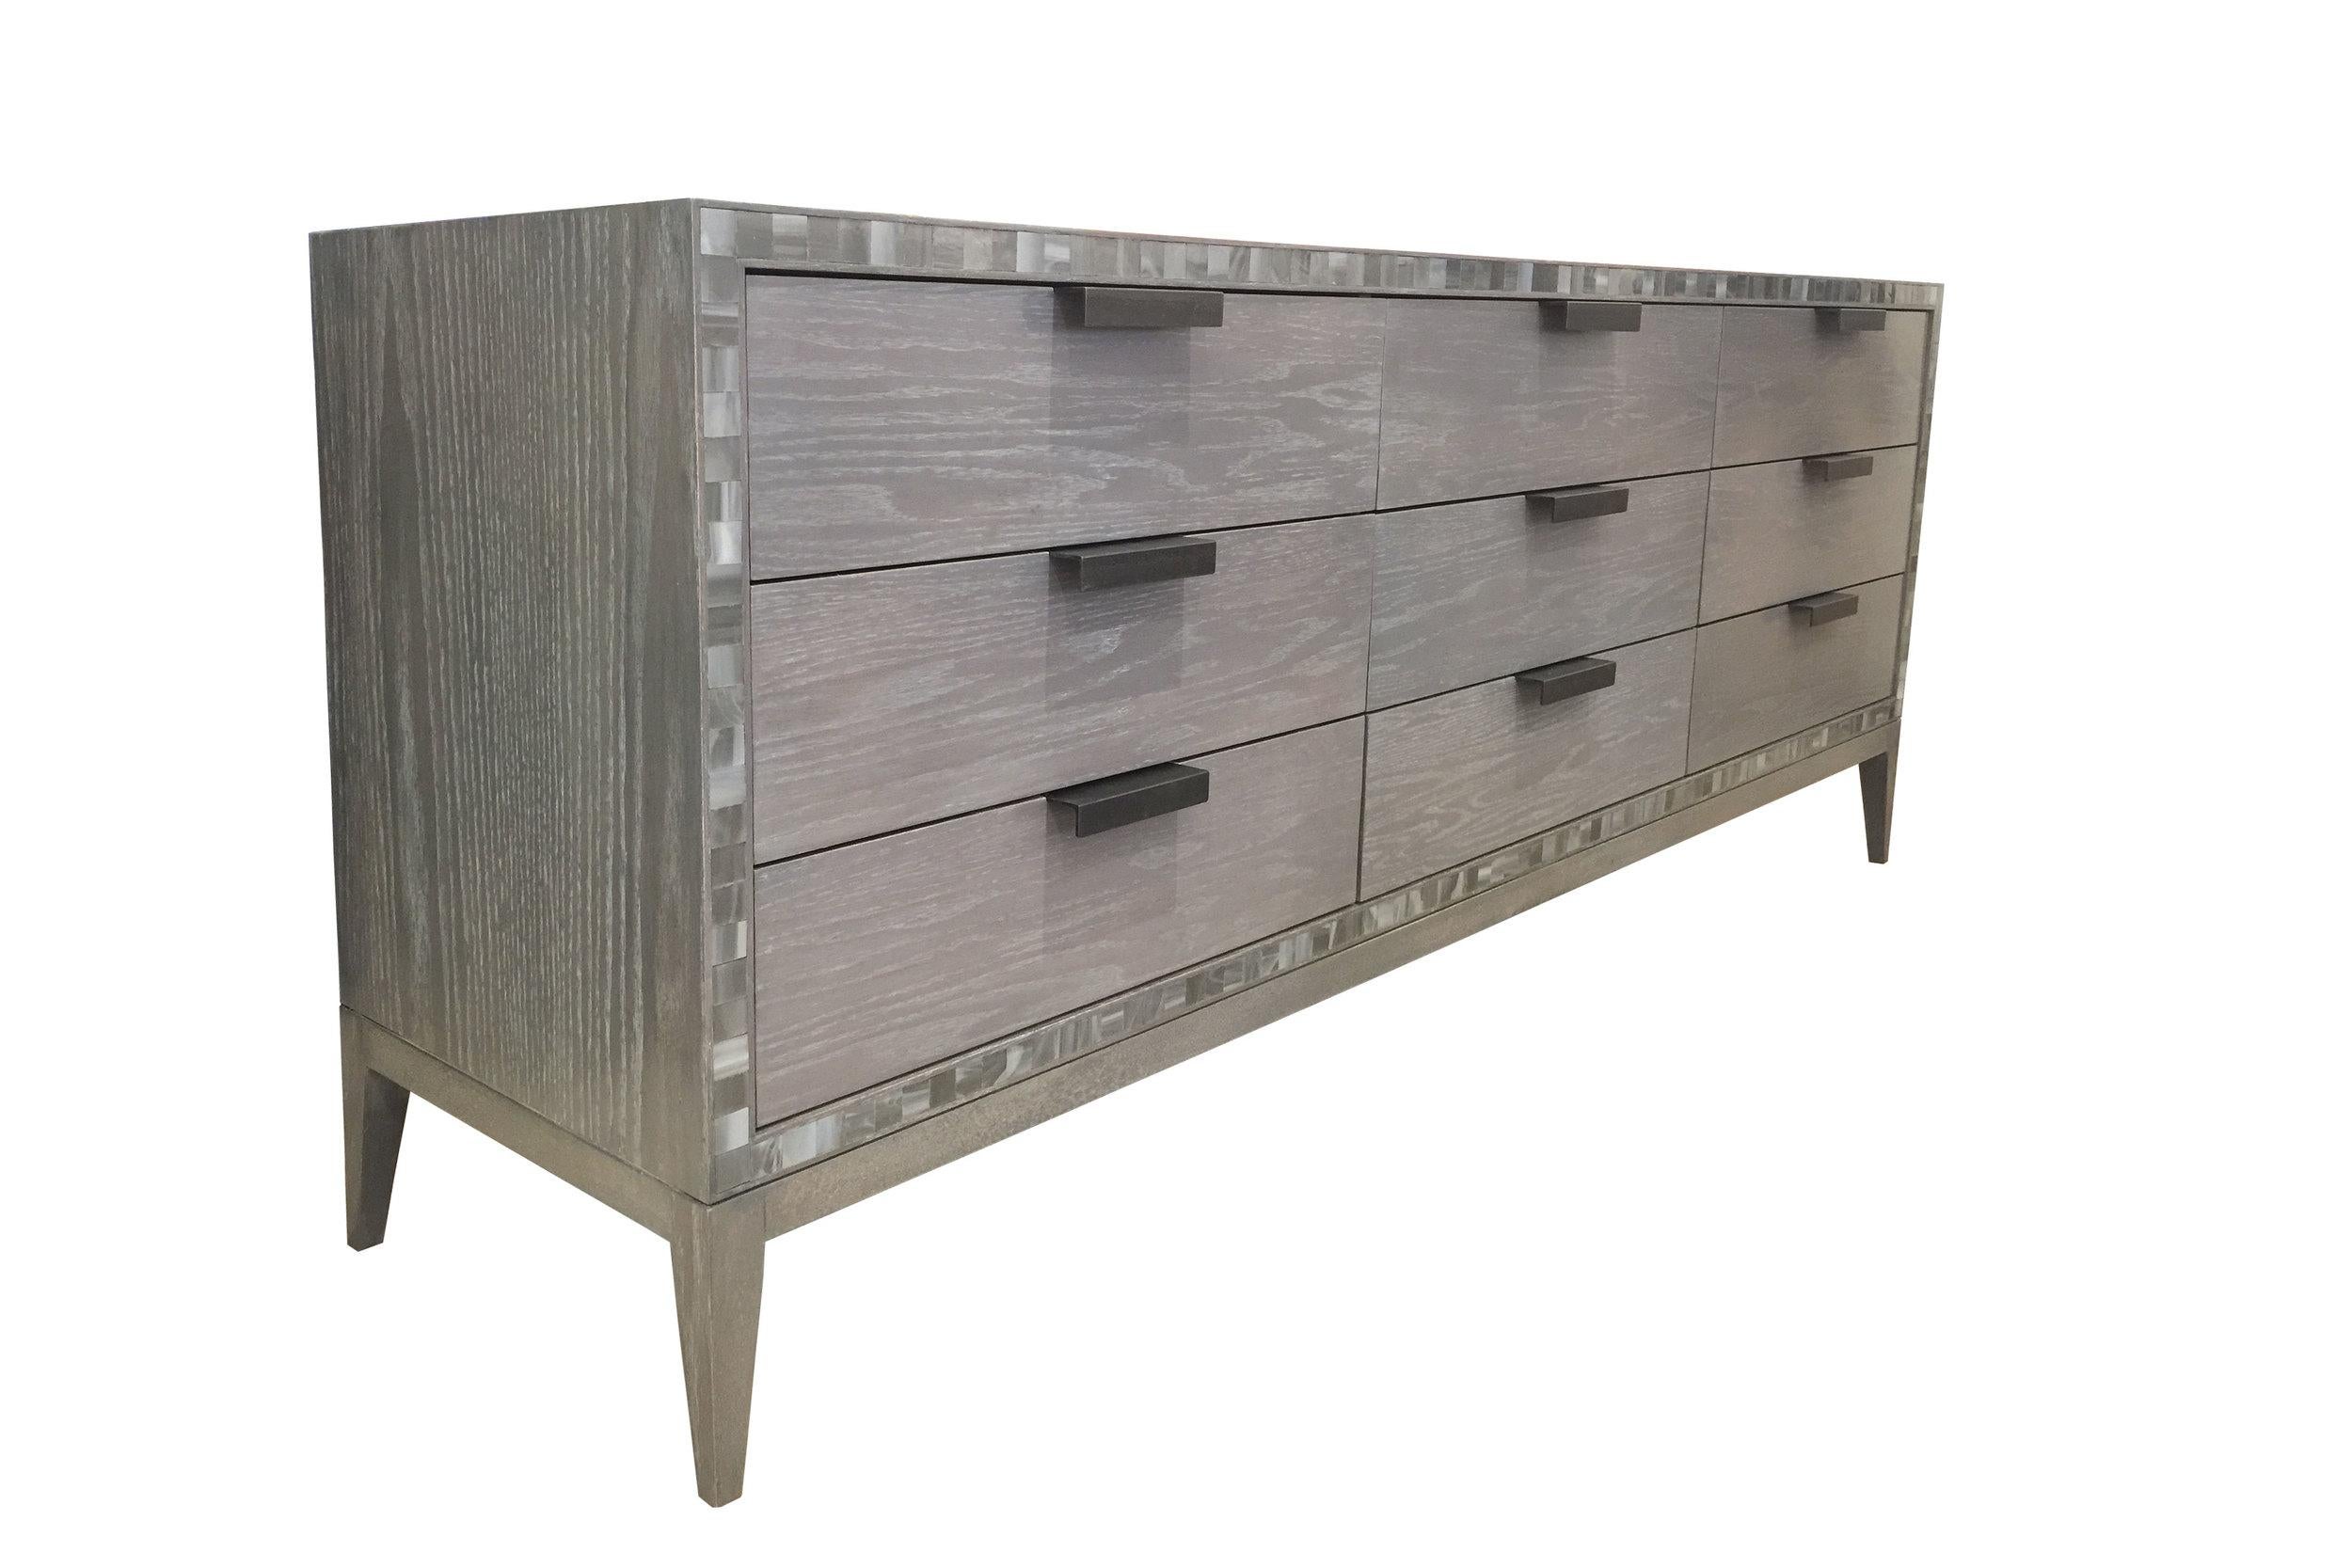 The Milano chest of 9 drawers by Ercole Home consisted of 9 drawers all adorned with handmade industrial steel pulls. The chest its self is painted in our personal Earl Gray Ceruse Finish that compliments the natural grain of the oak wood. The